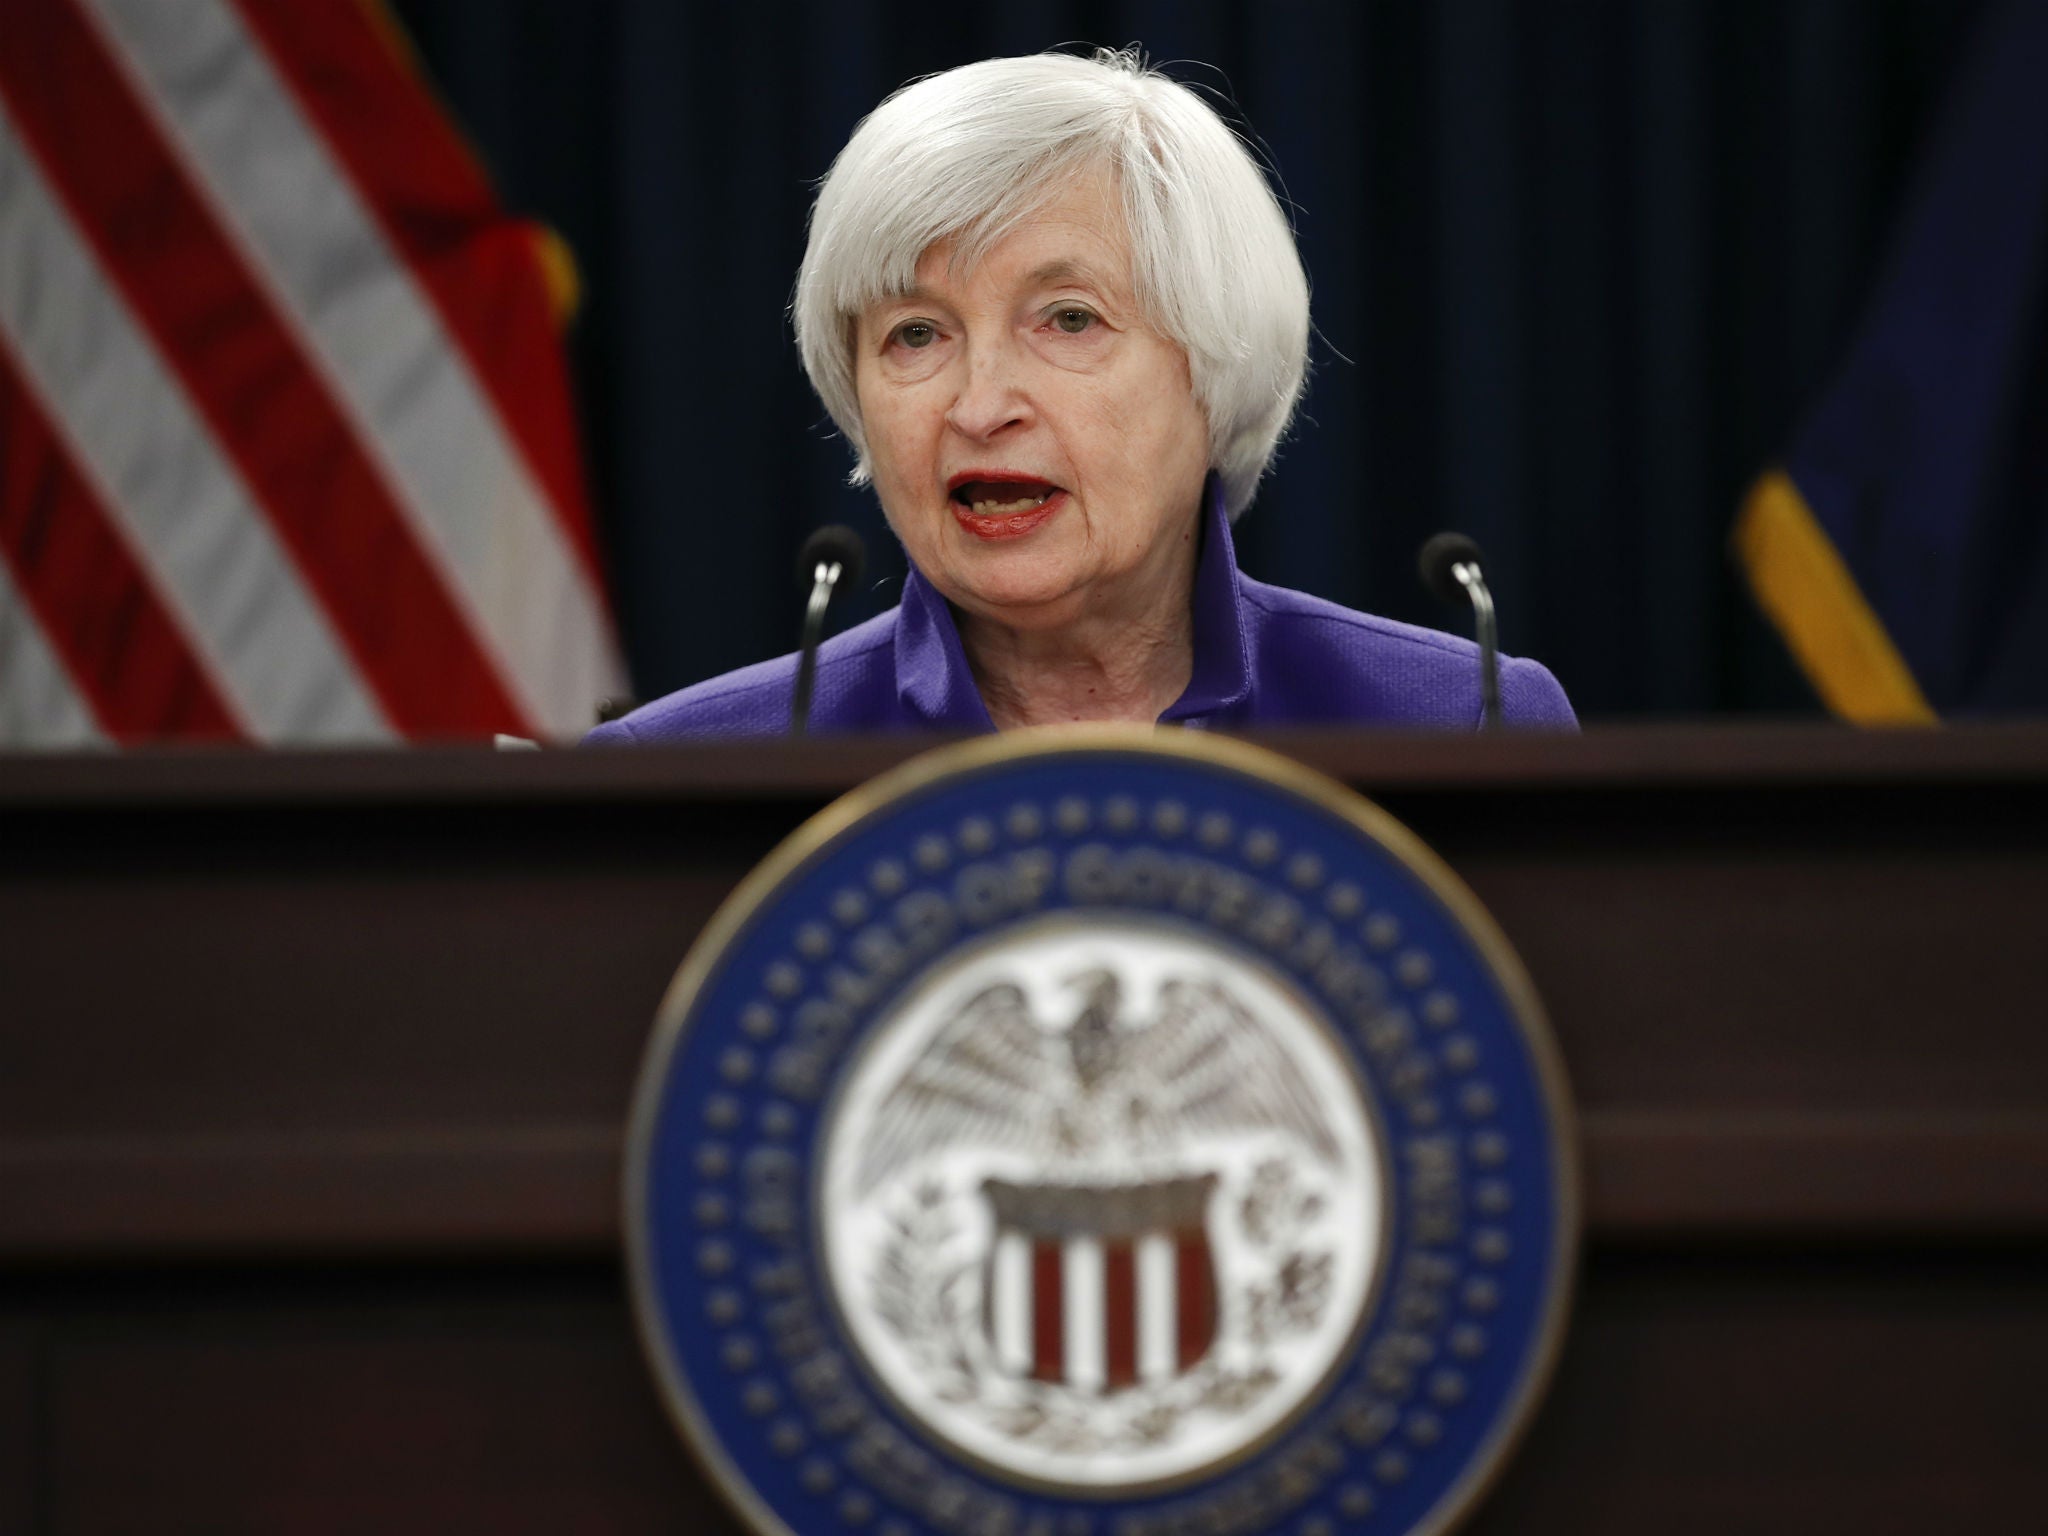 Federal Reserve Chair Janet Yellen is due to step down in February